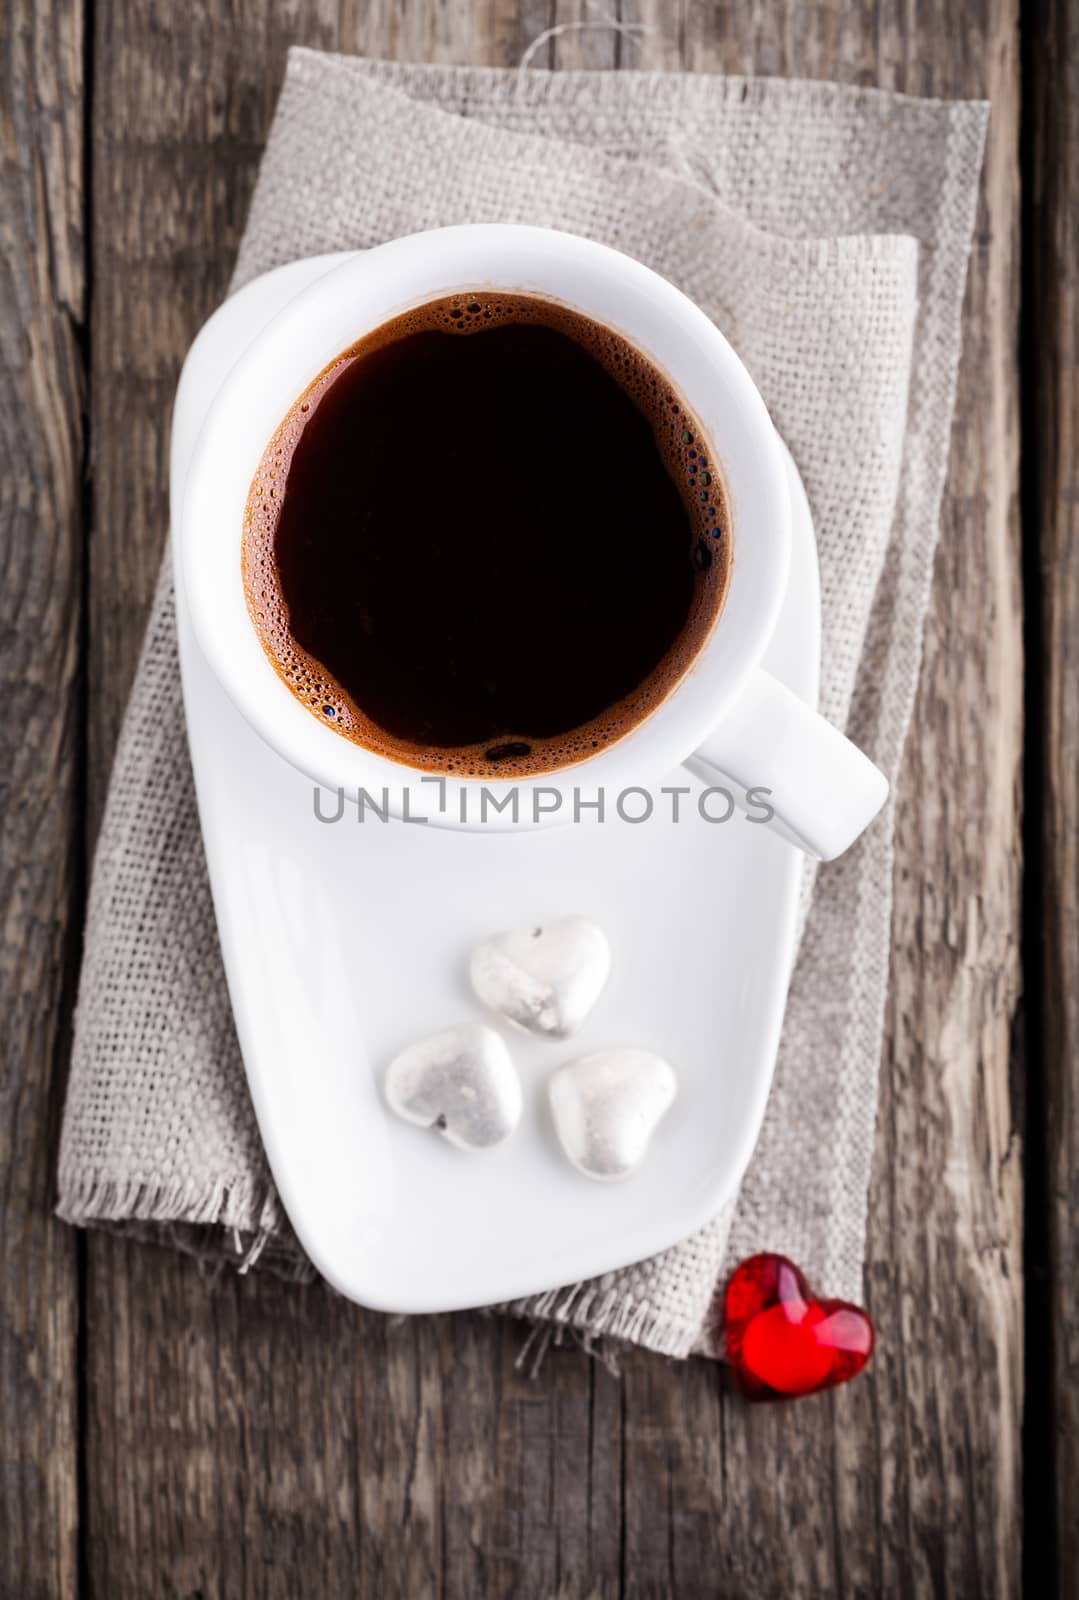 Cup of coffee served on a wooden surface by supercat67